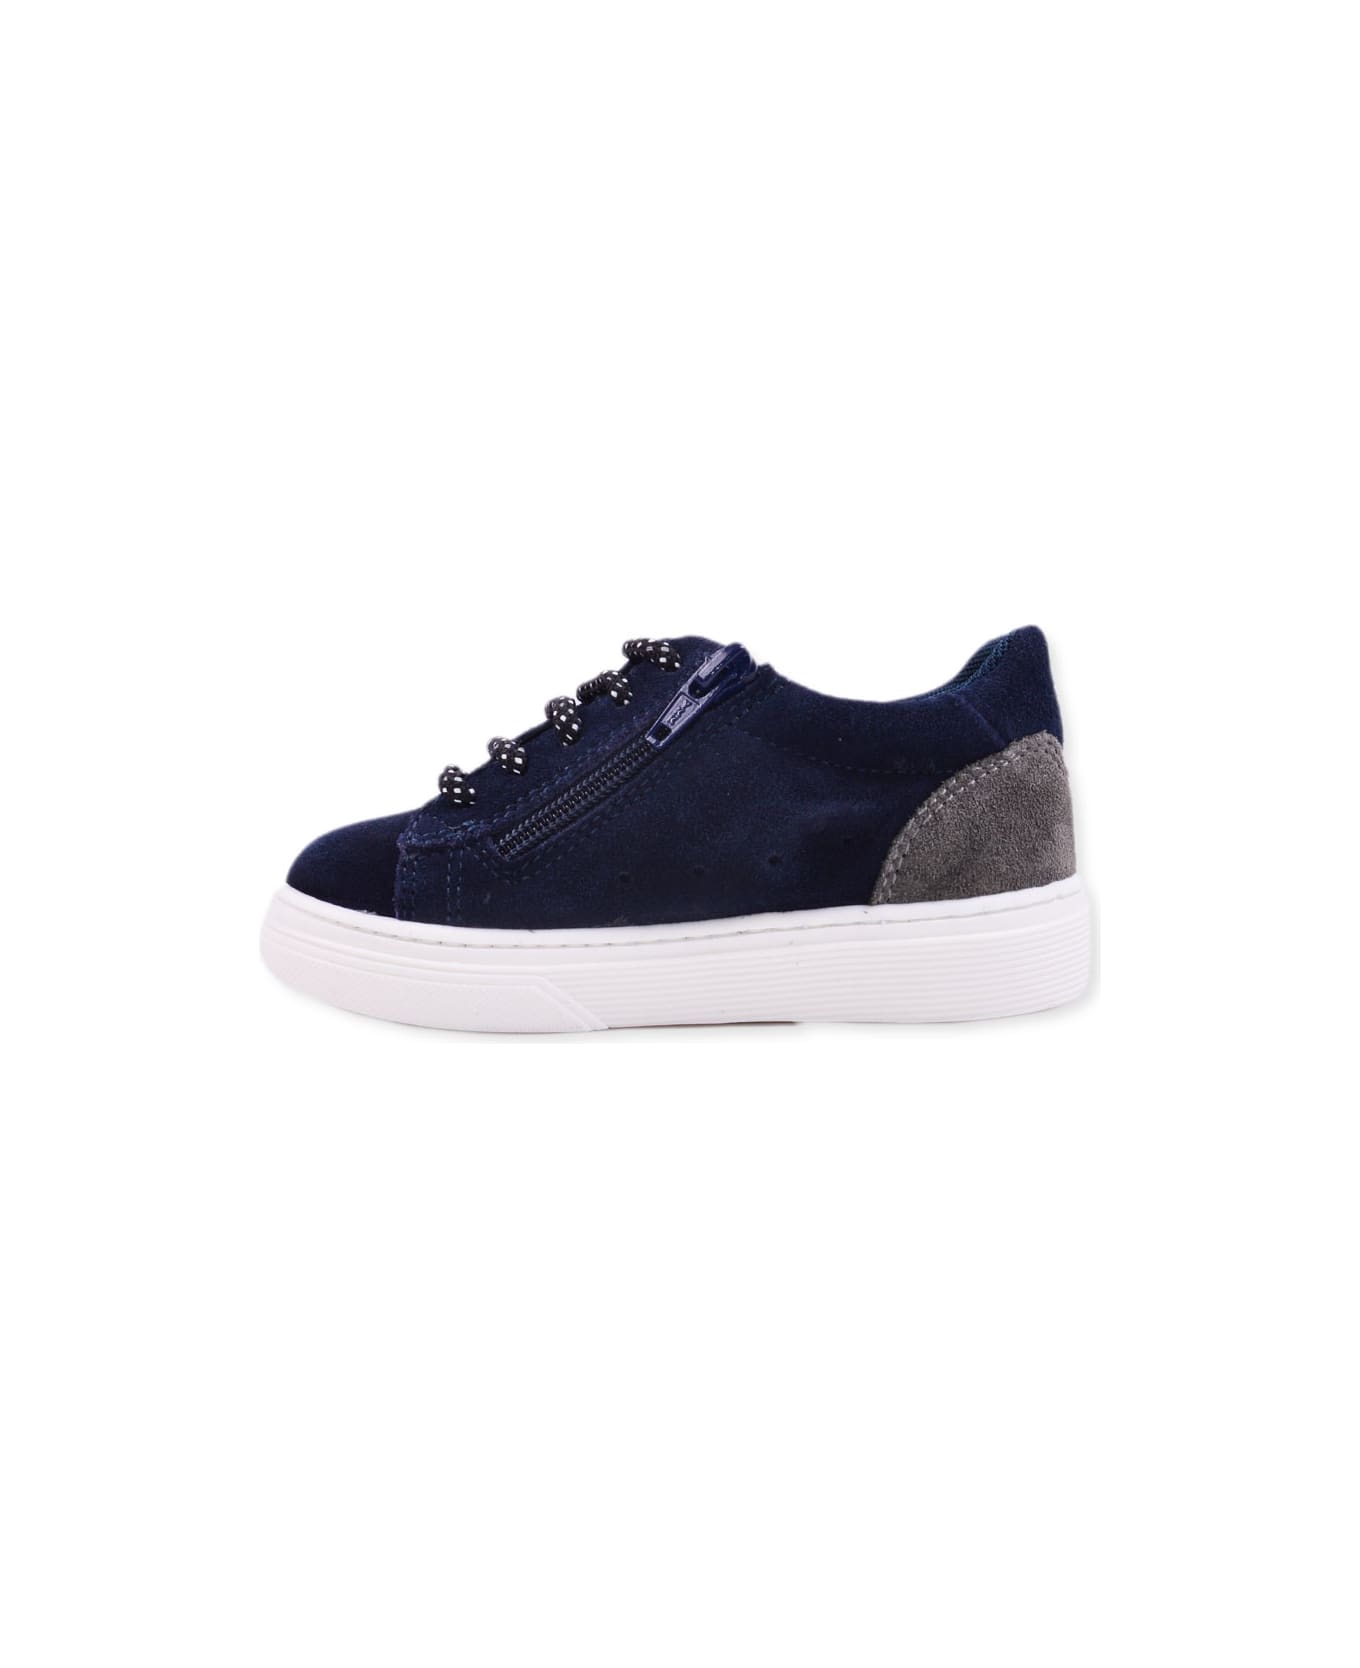 Hogan Sneakers In Suede Leather - Blue